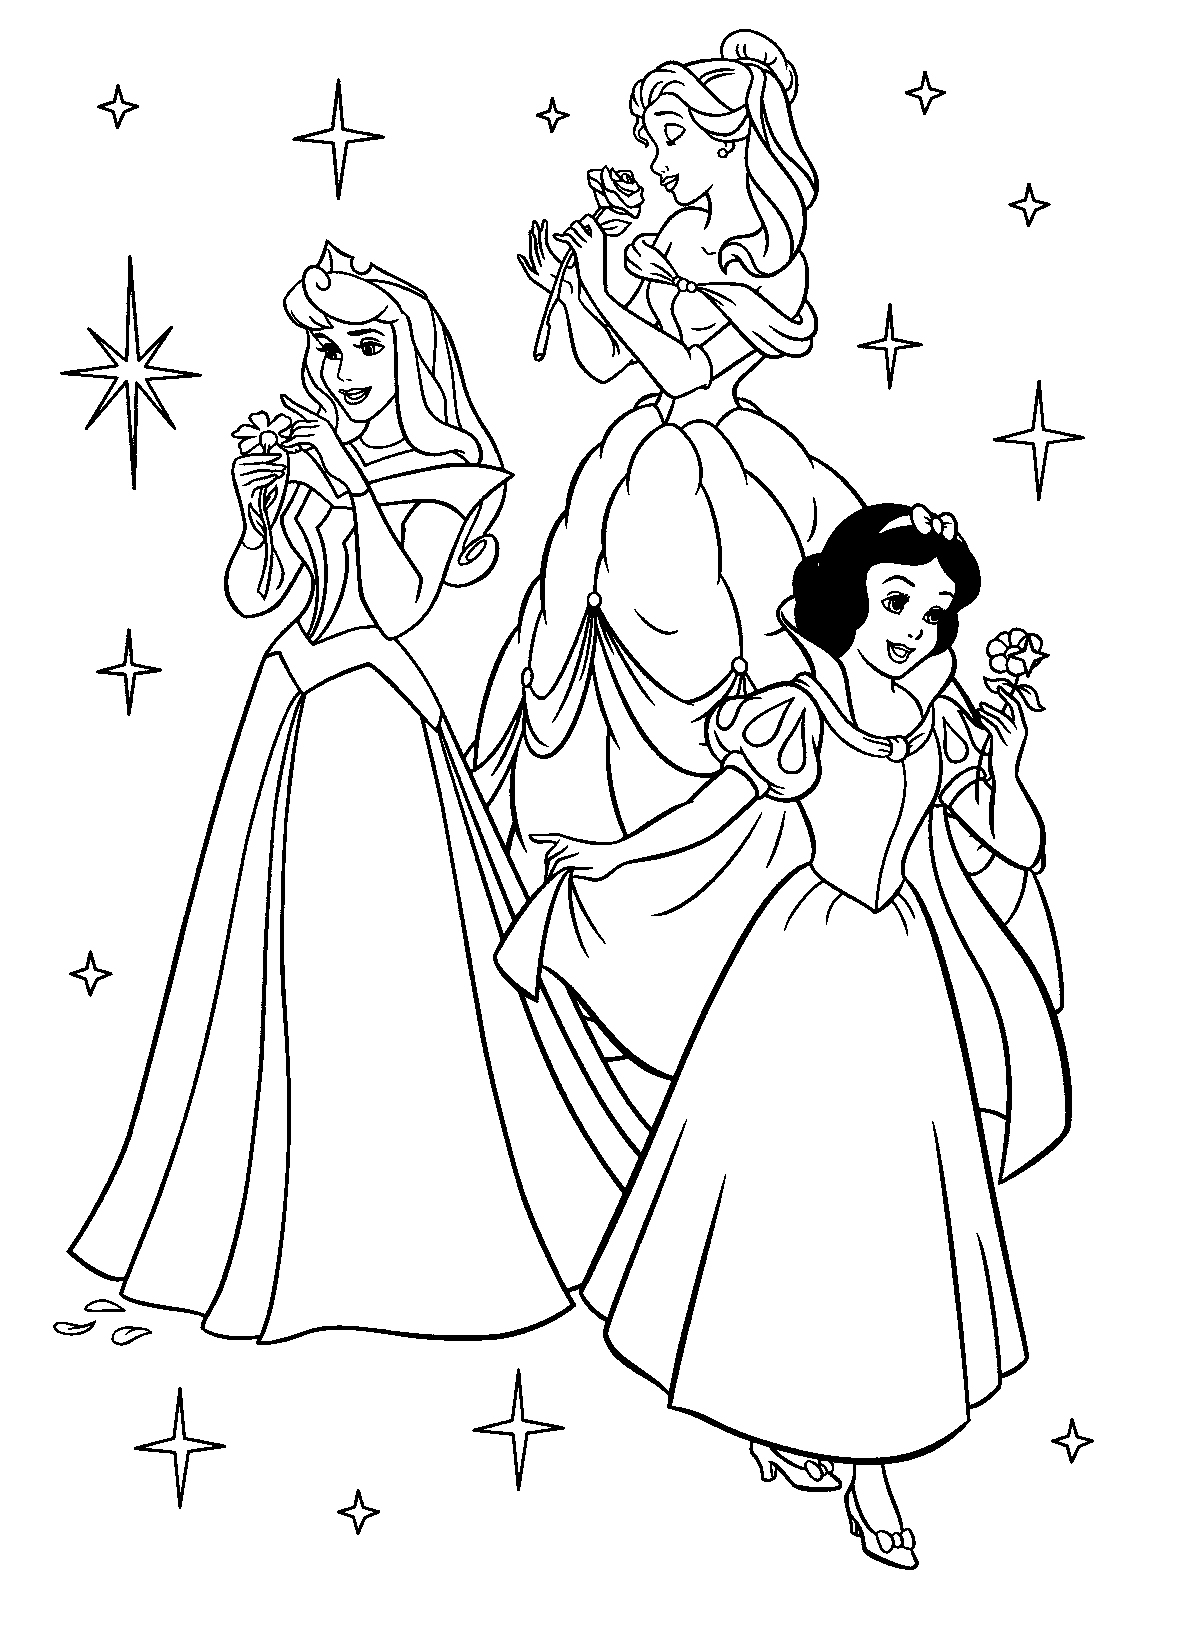 Coloring Pages For Free Disney Rsad Coloring Pages Kleurplaten Disney Kleurplaten Dis